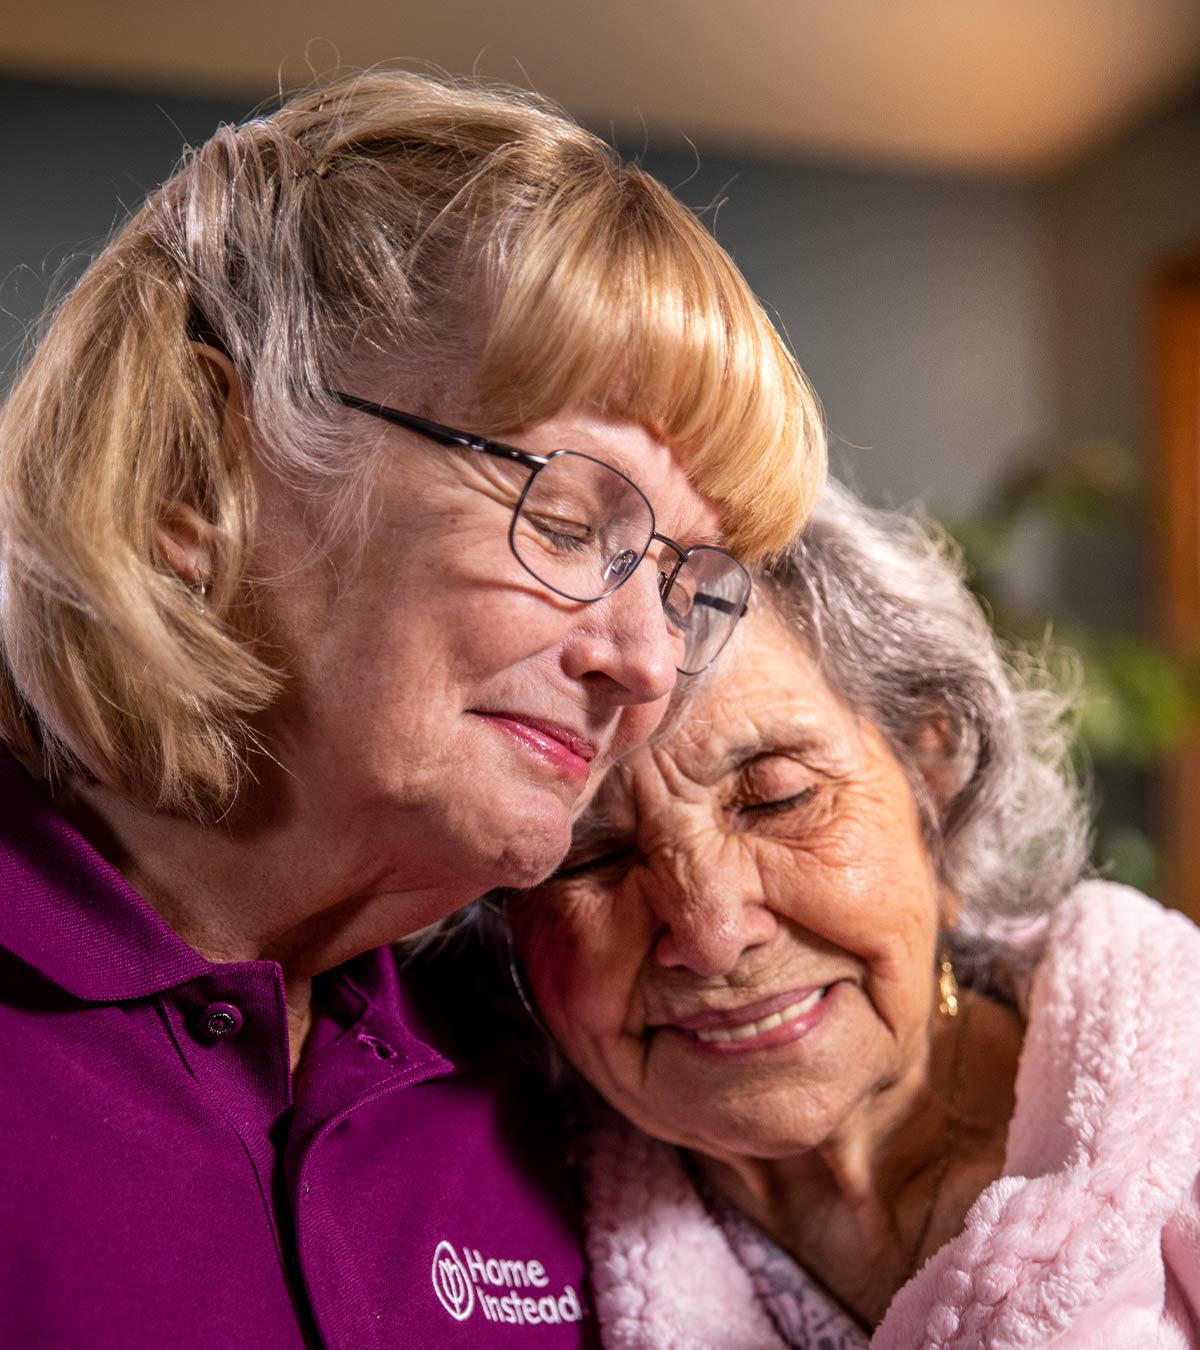 CAREGiver providing in-home senior care services. Home Instead of Winchester, VA provides Elder Care to aging adults. 